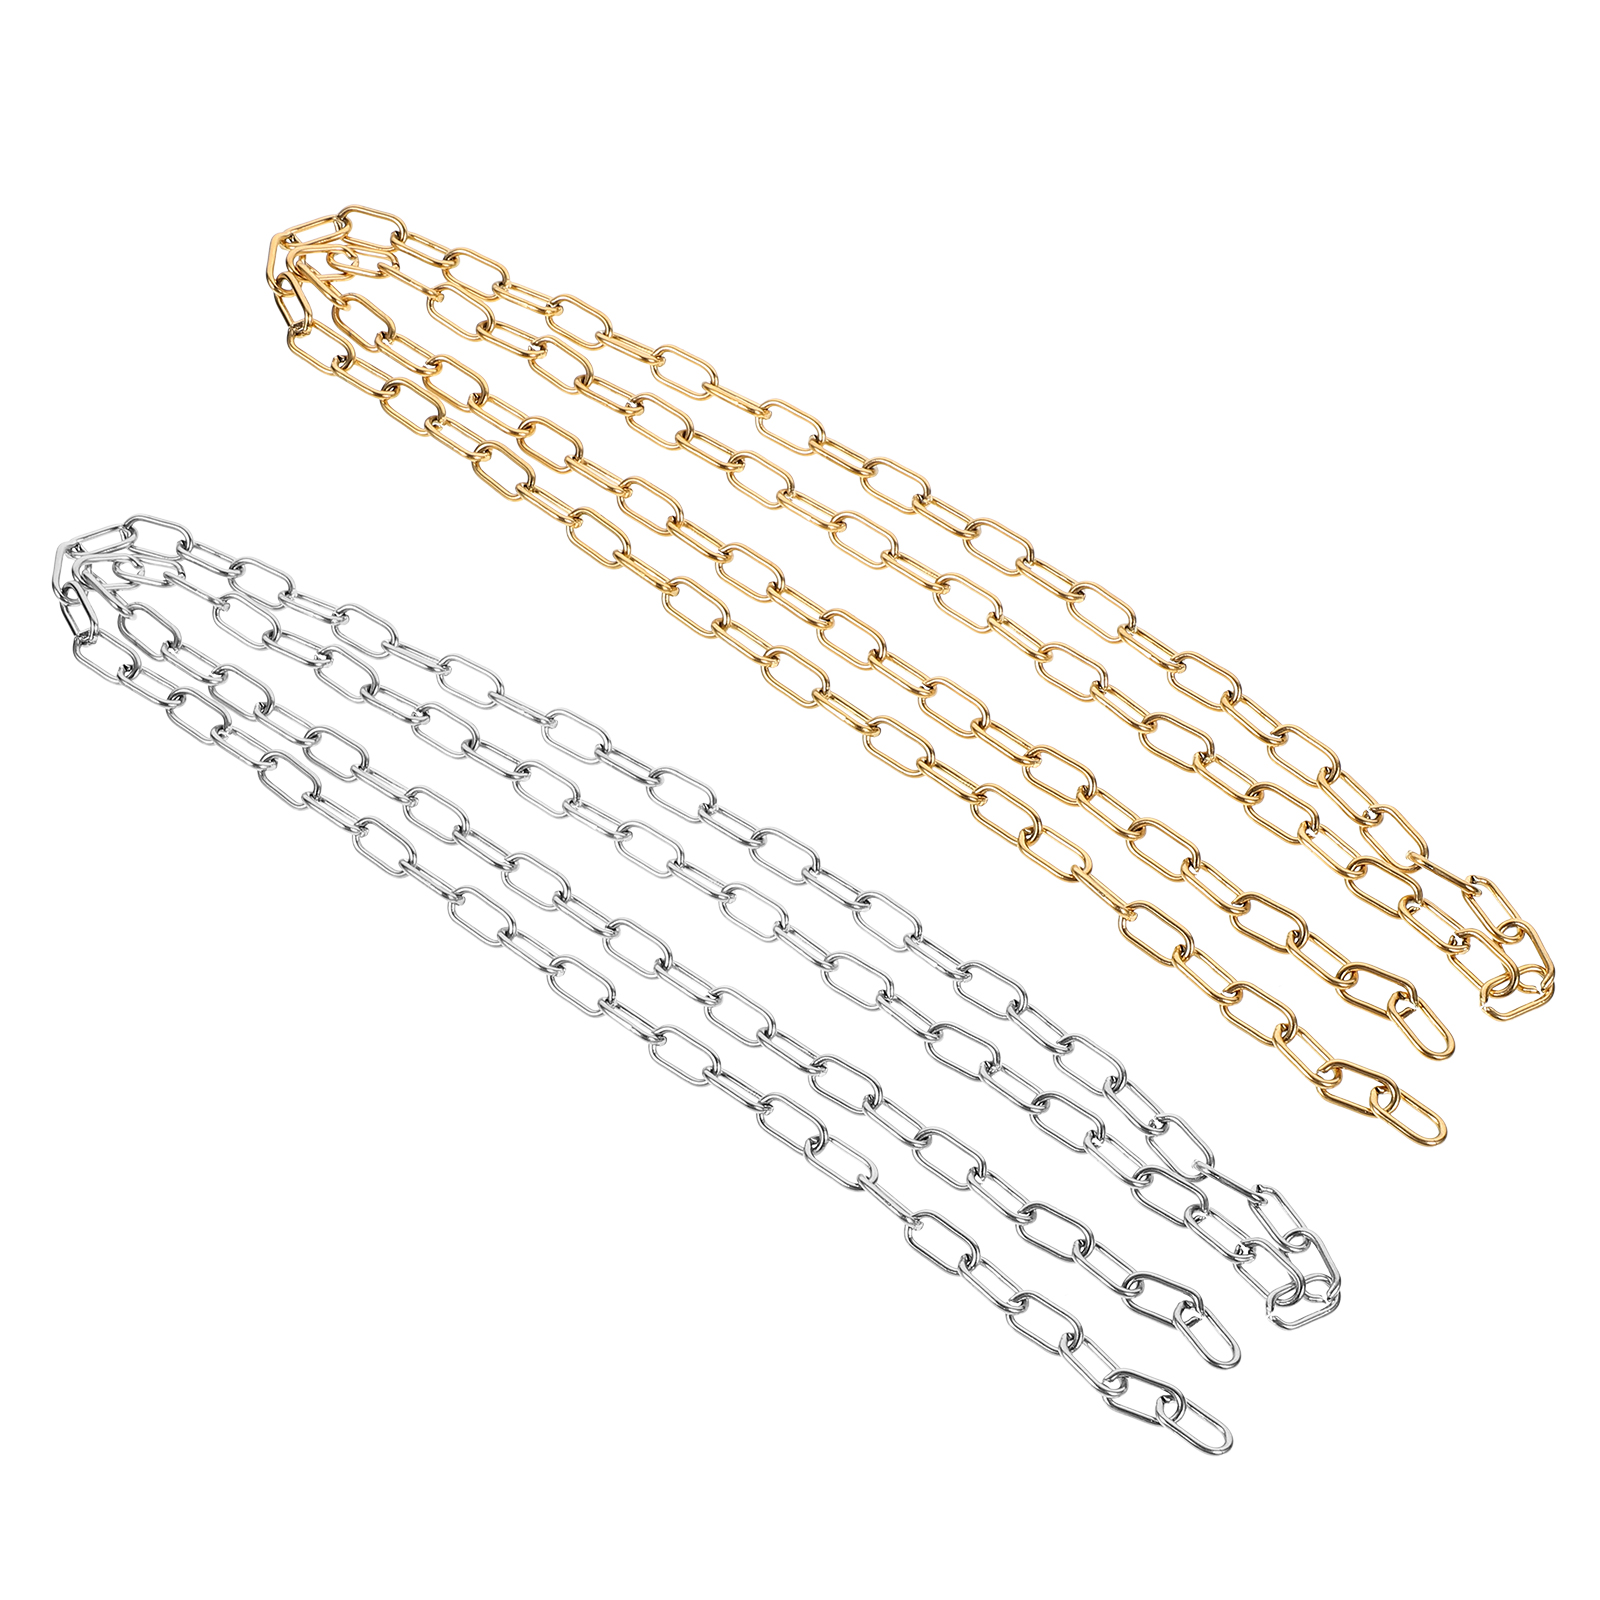 2 Rolls Jewelry Chain Chains Stainless Steel Link Chain Punk Necklace ...